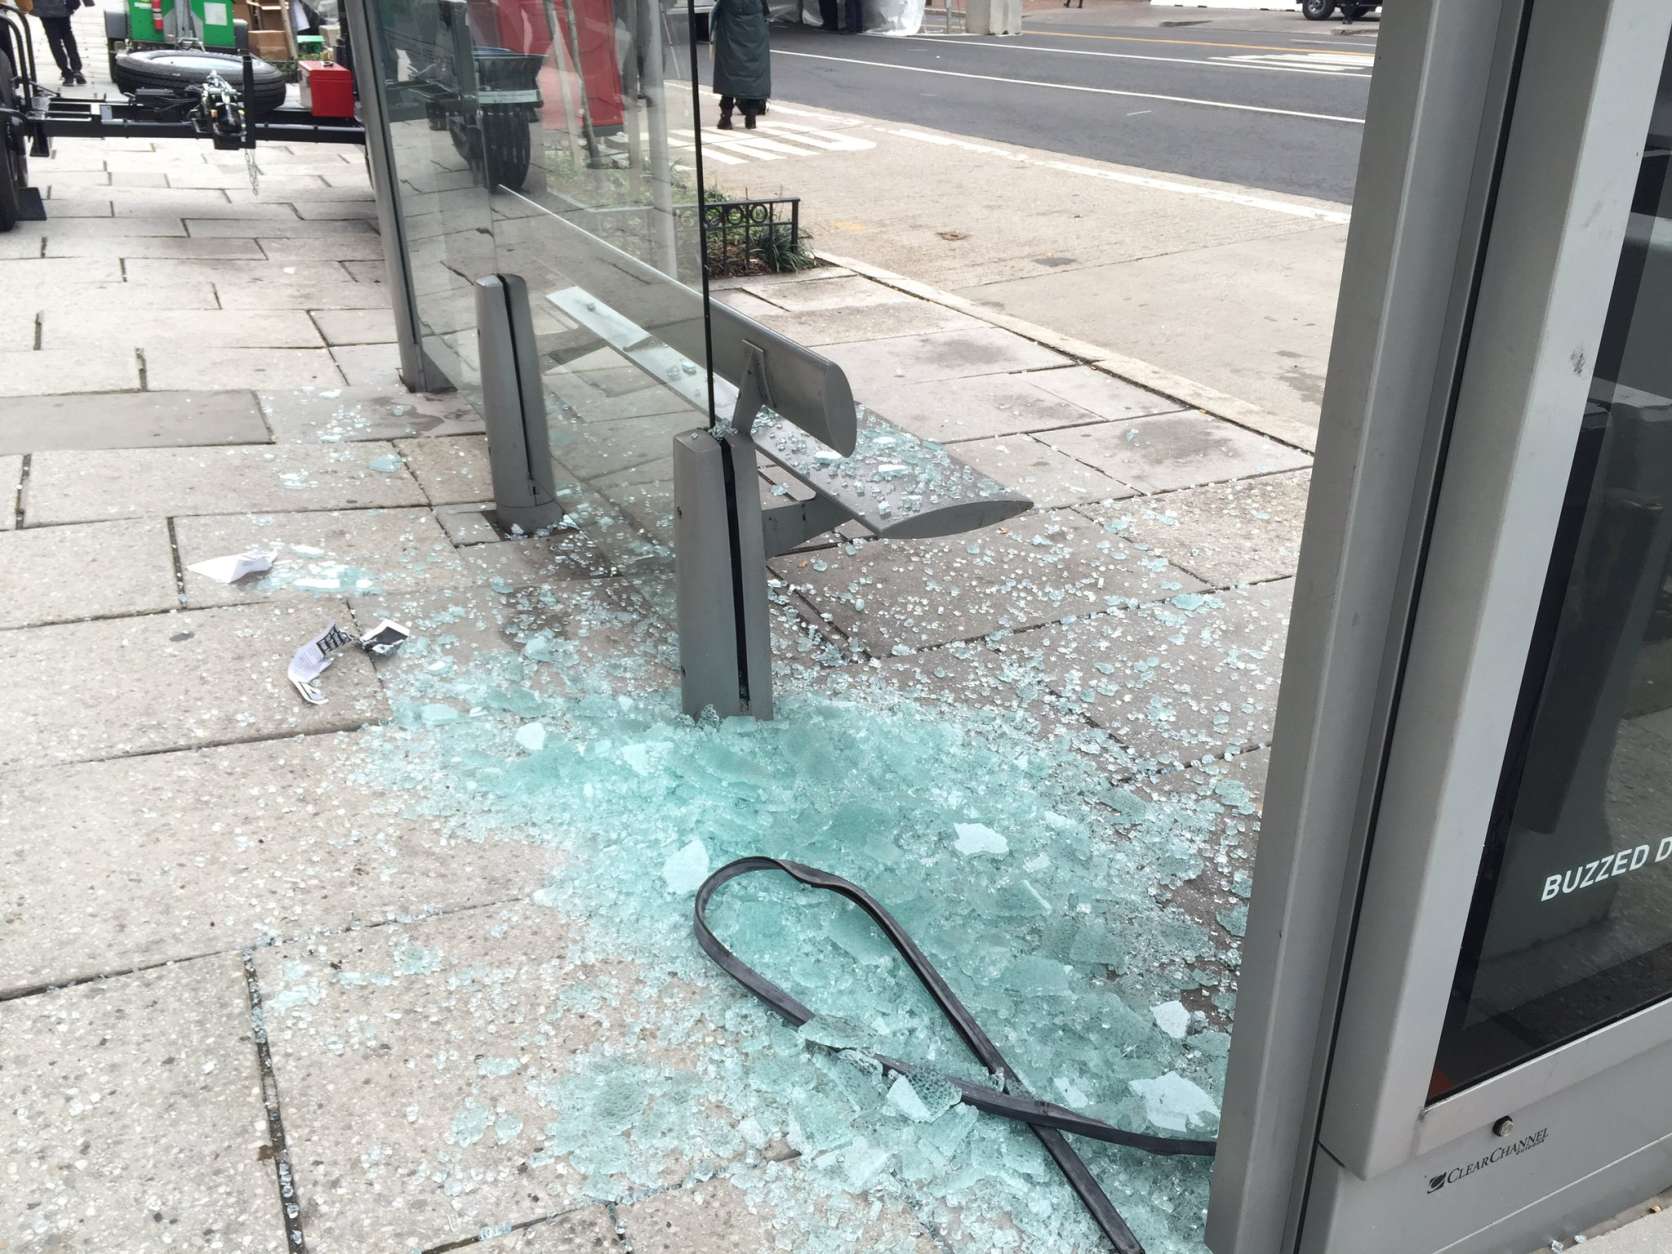 Protesters damage a bus stop on 13th Street NW. (WTOP/Dennis Foley)